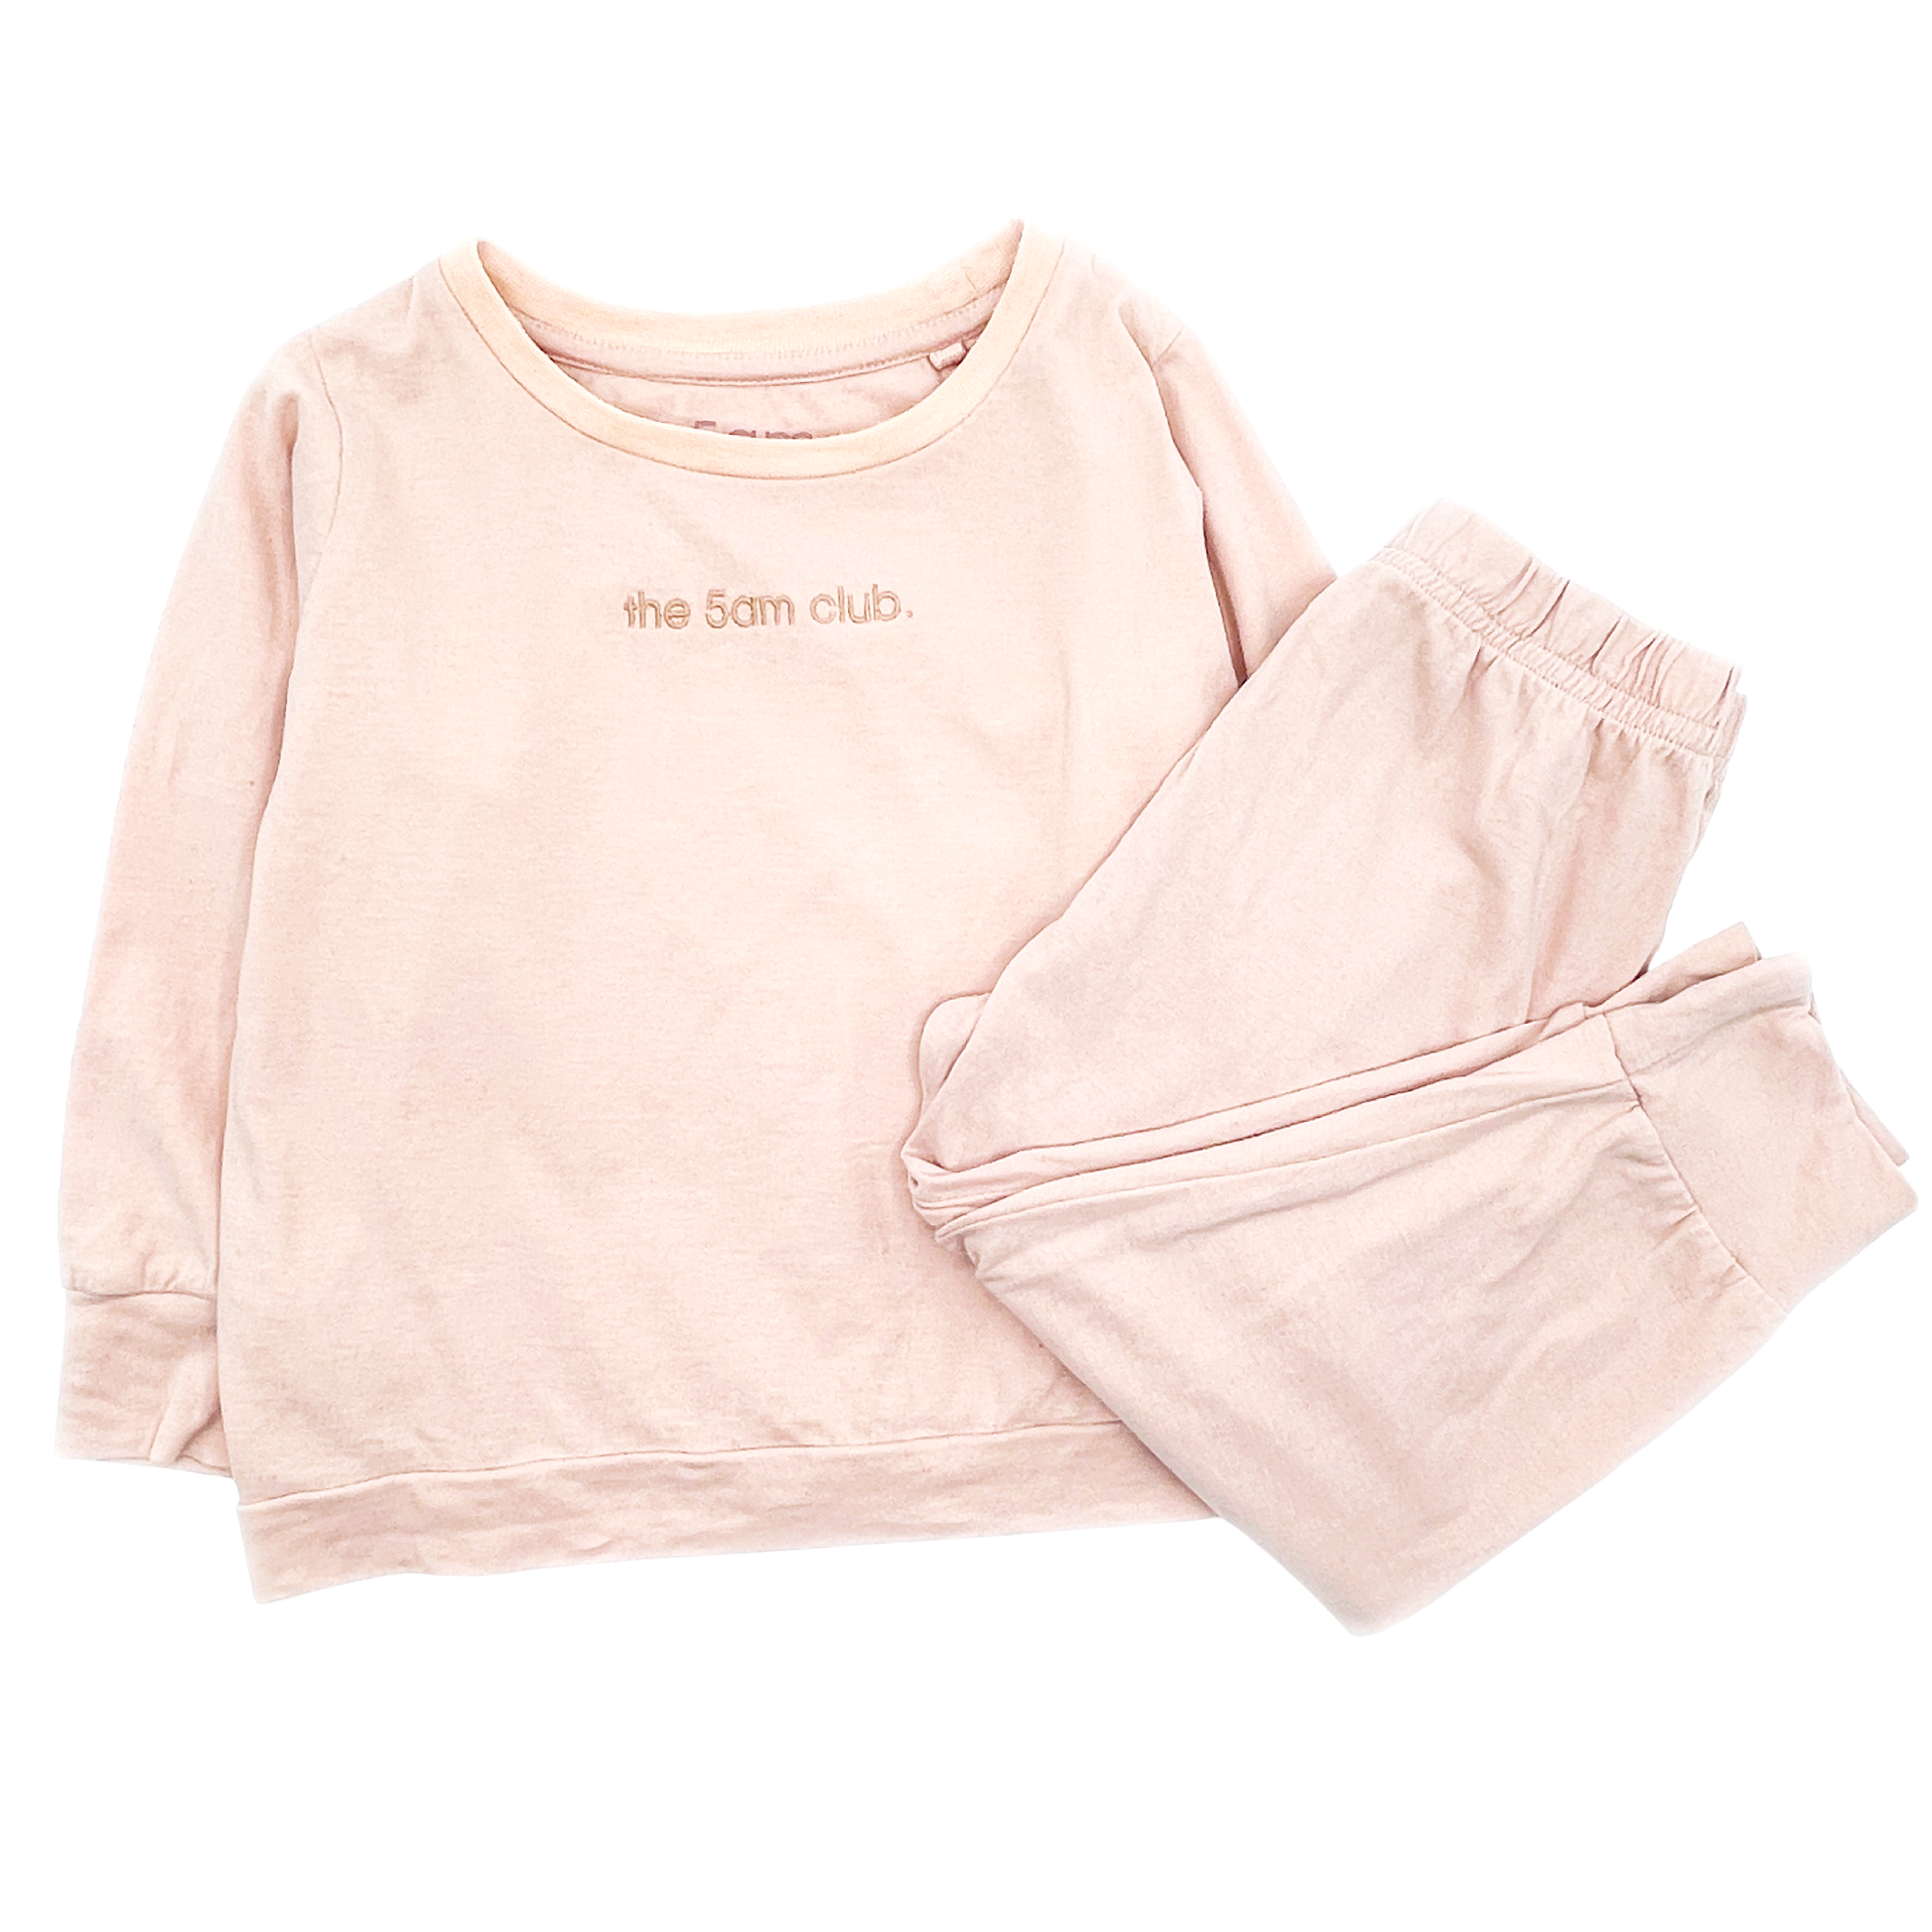 blush pink long sleeve top from the 5am mama. The 5am club logo on the chest